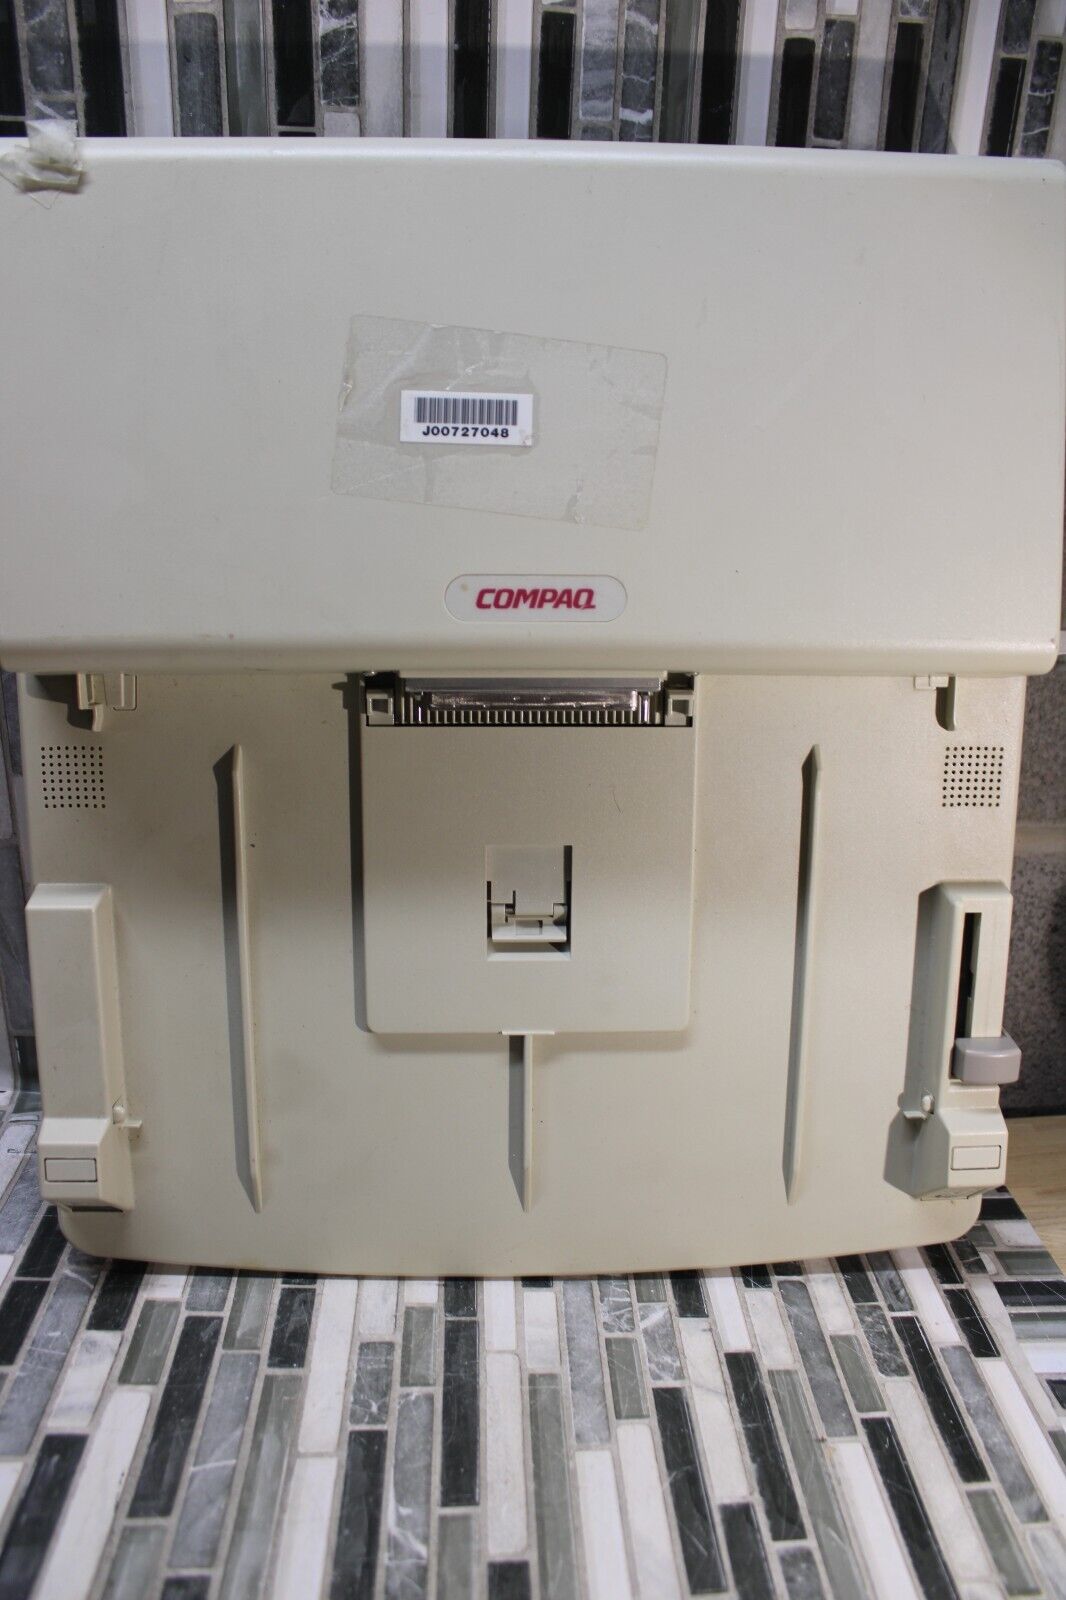 Compaq Multibay Expansion Base Series 2885 Vintage Computer NOT TESTED SOLD ASIS